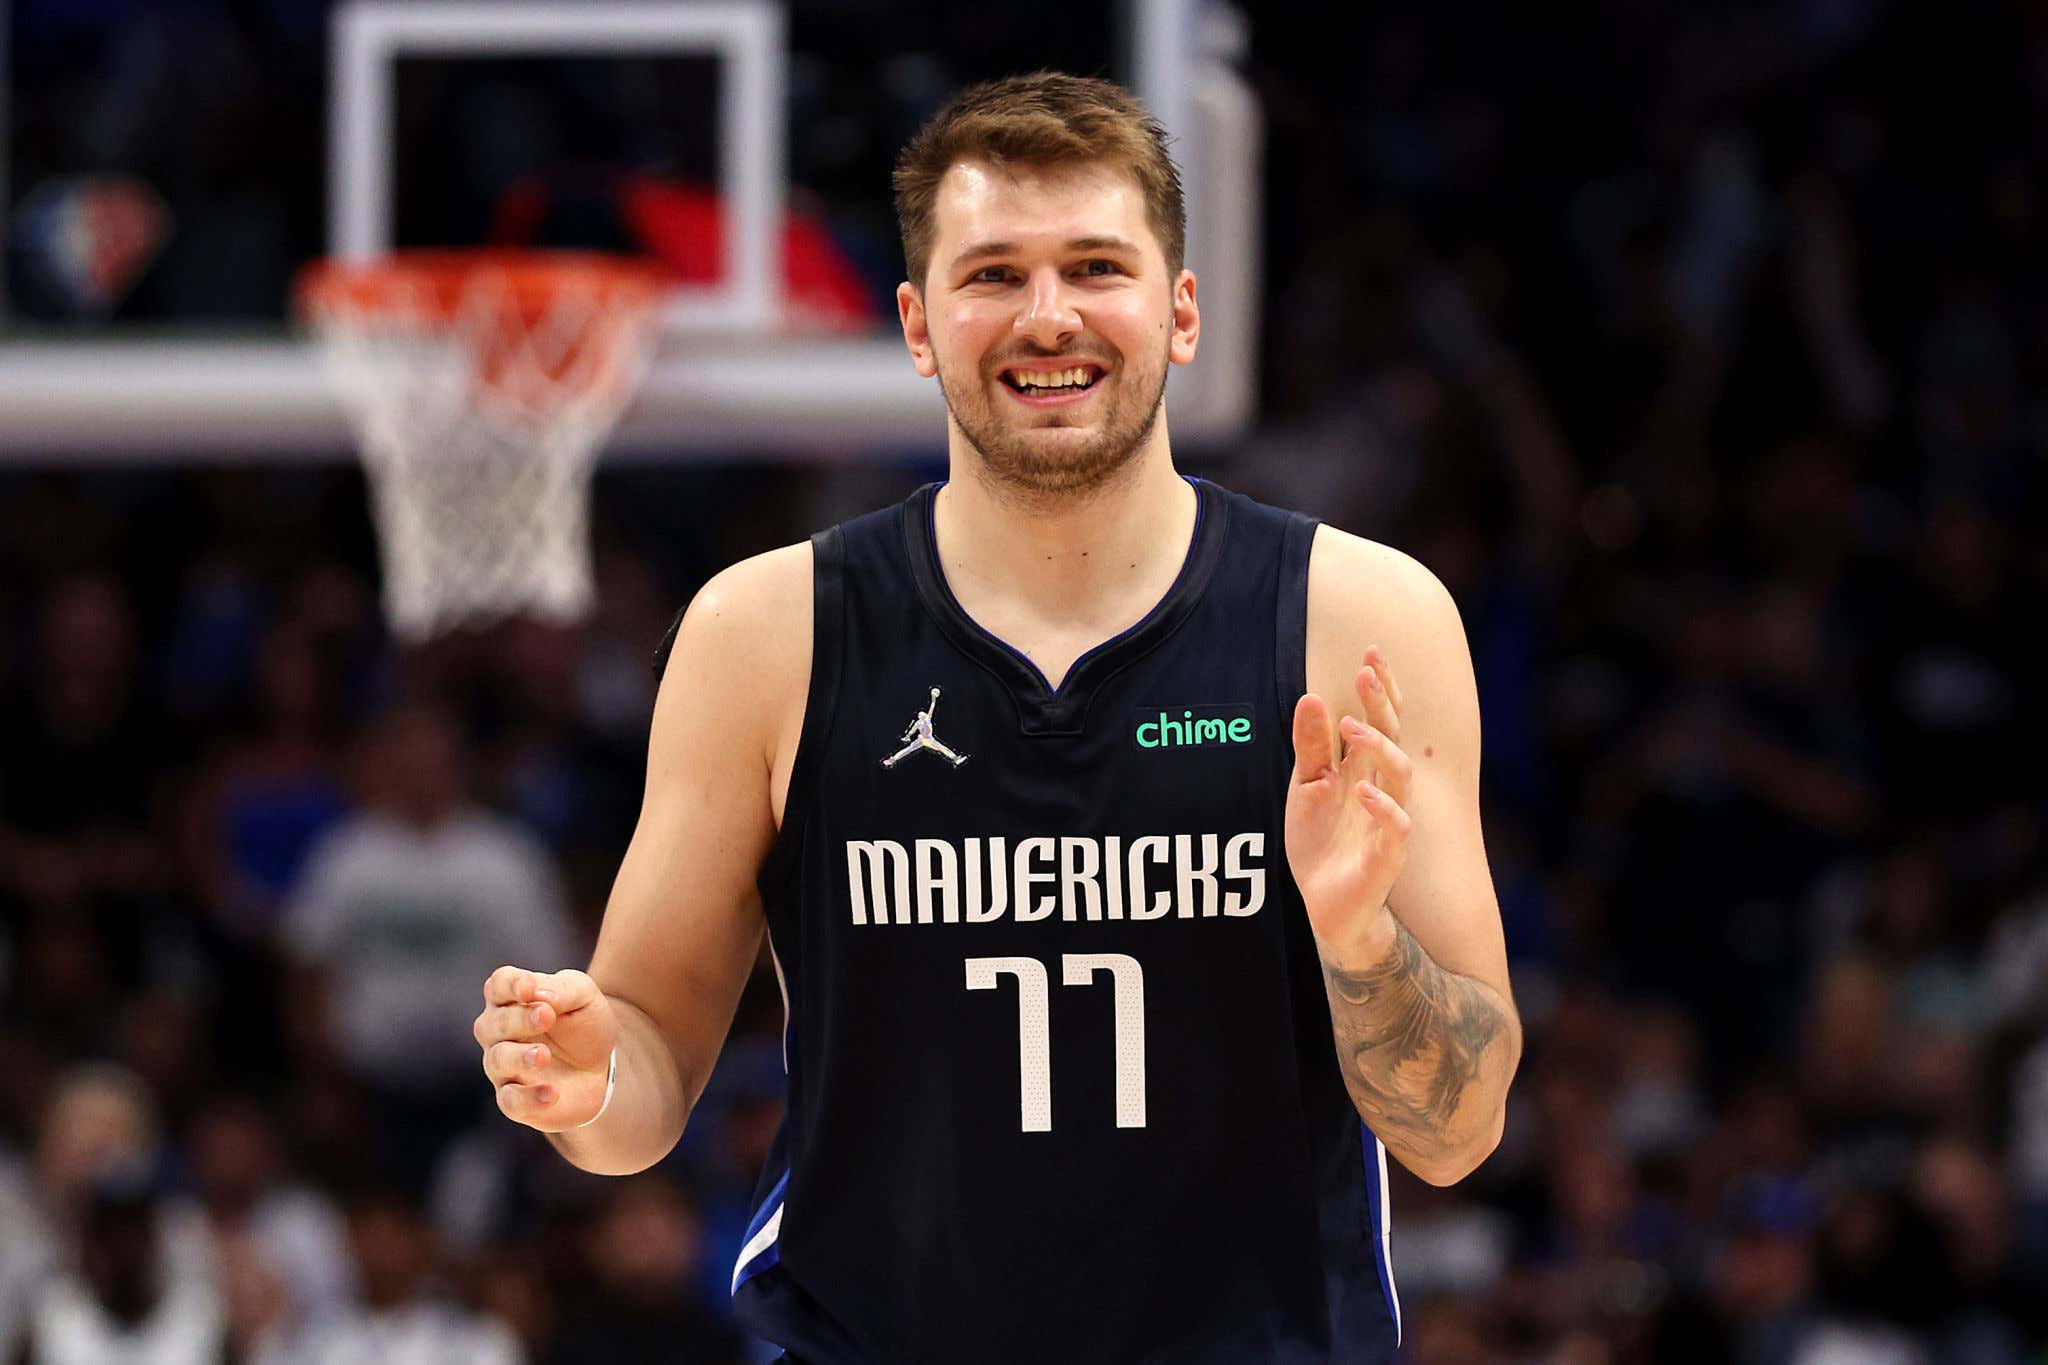 Luka Doncic Is Reportedly Finally Getting In Shape This Summer And That Could Be Very Bad News For The Rest Of The NBA